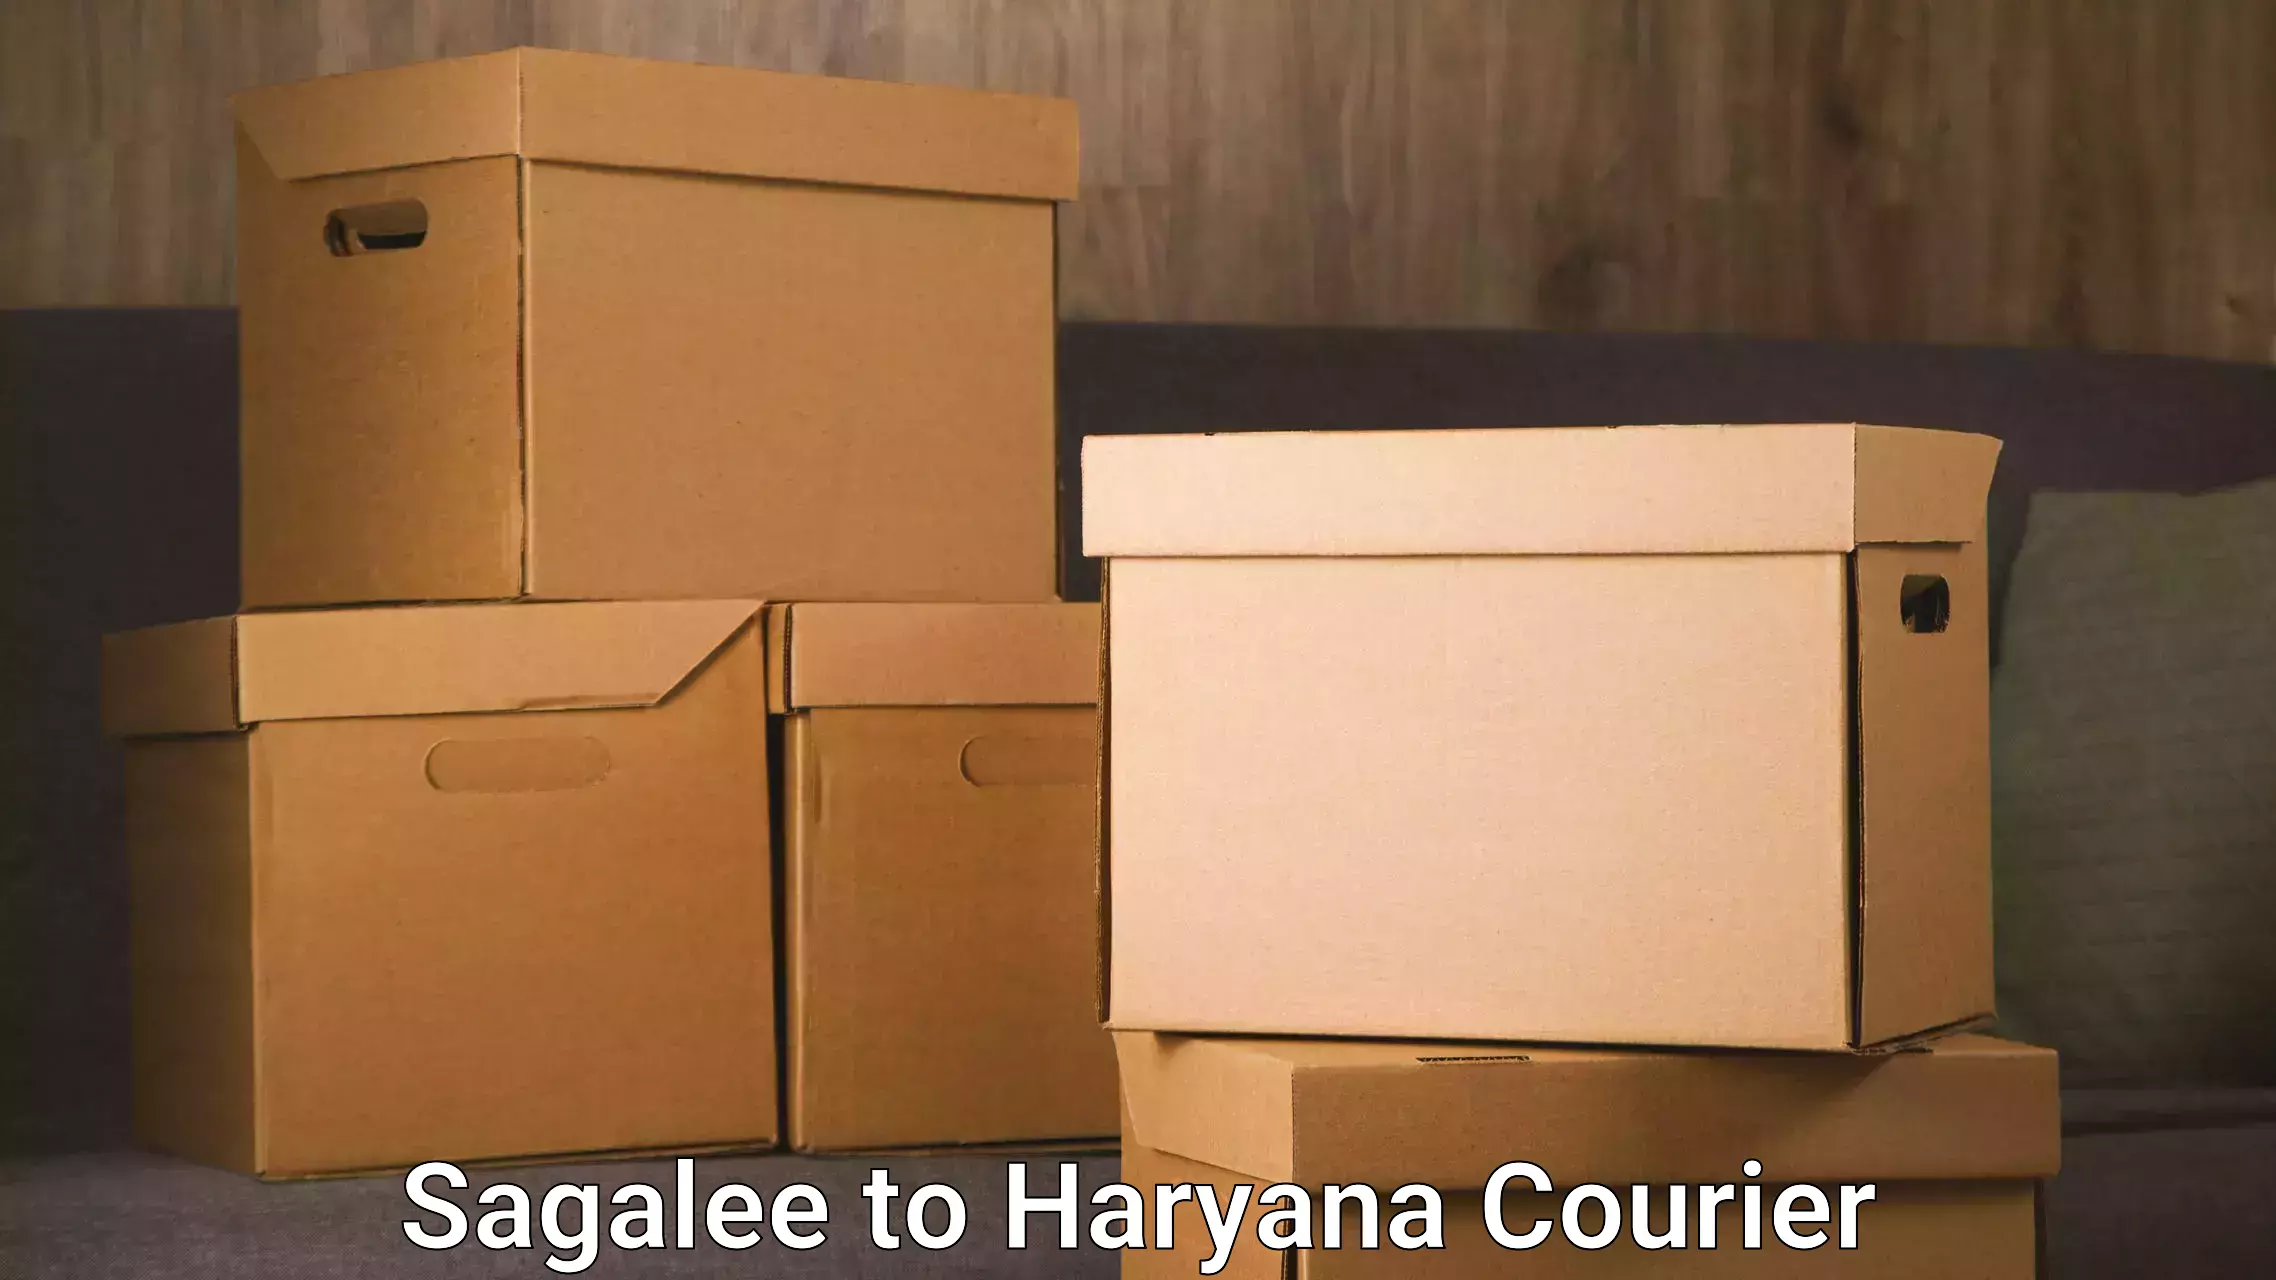 Courier service comparison Sagalee to Bhuna